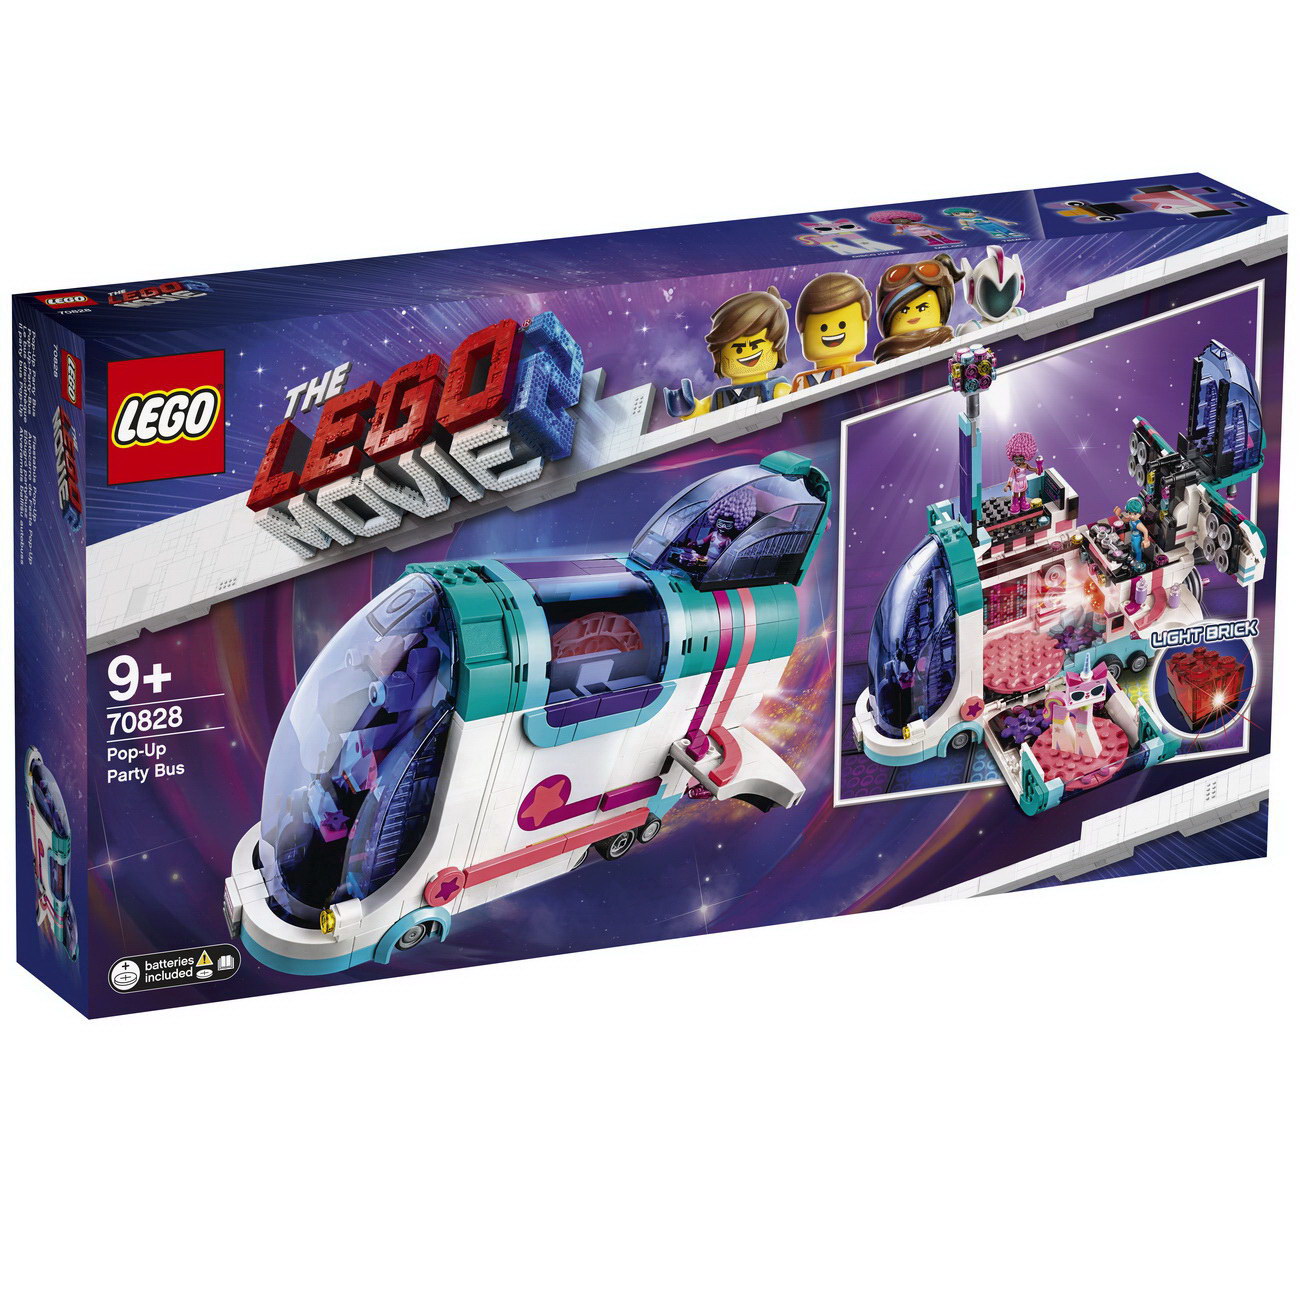 The LEGO Movie 2 70828 - Pop-Up Party Bus